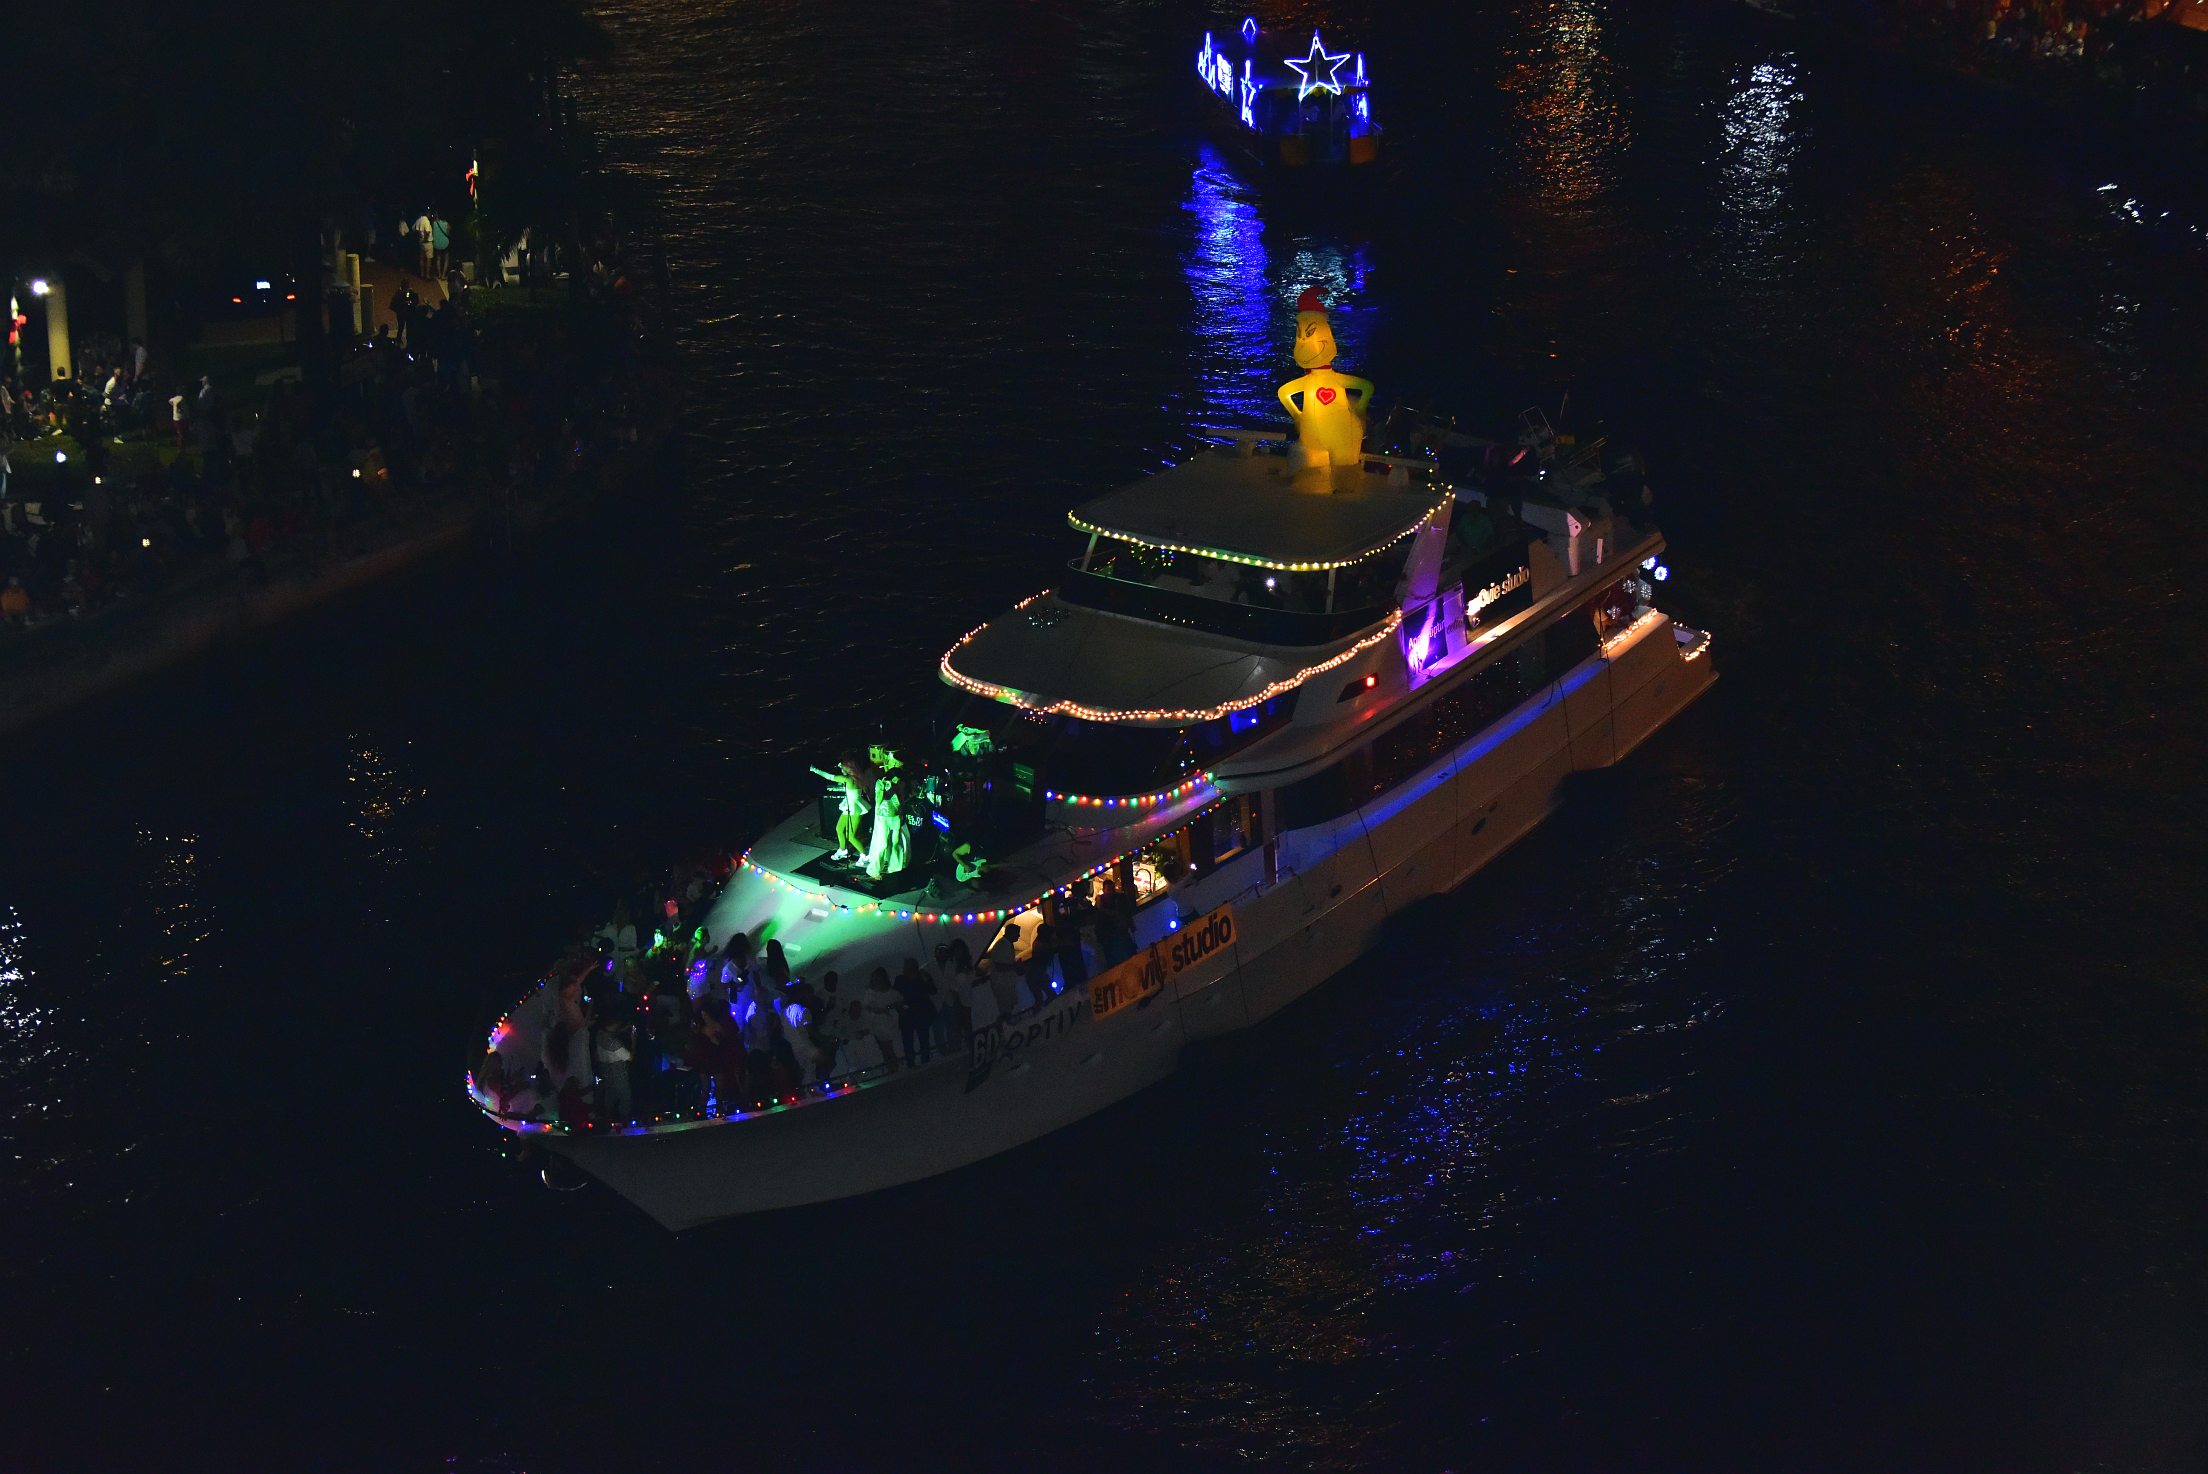 Miss Direction, boat number 60 in the 2021 Winterfest Boat Parade